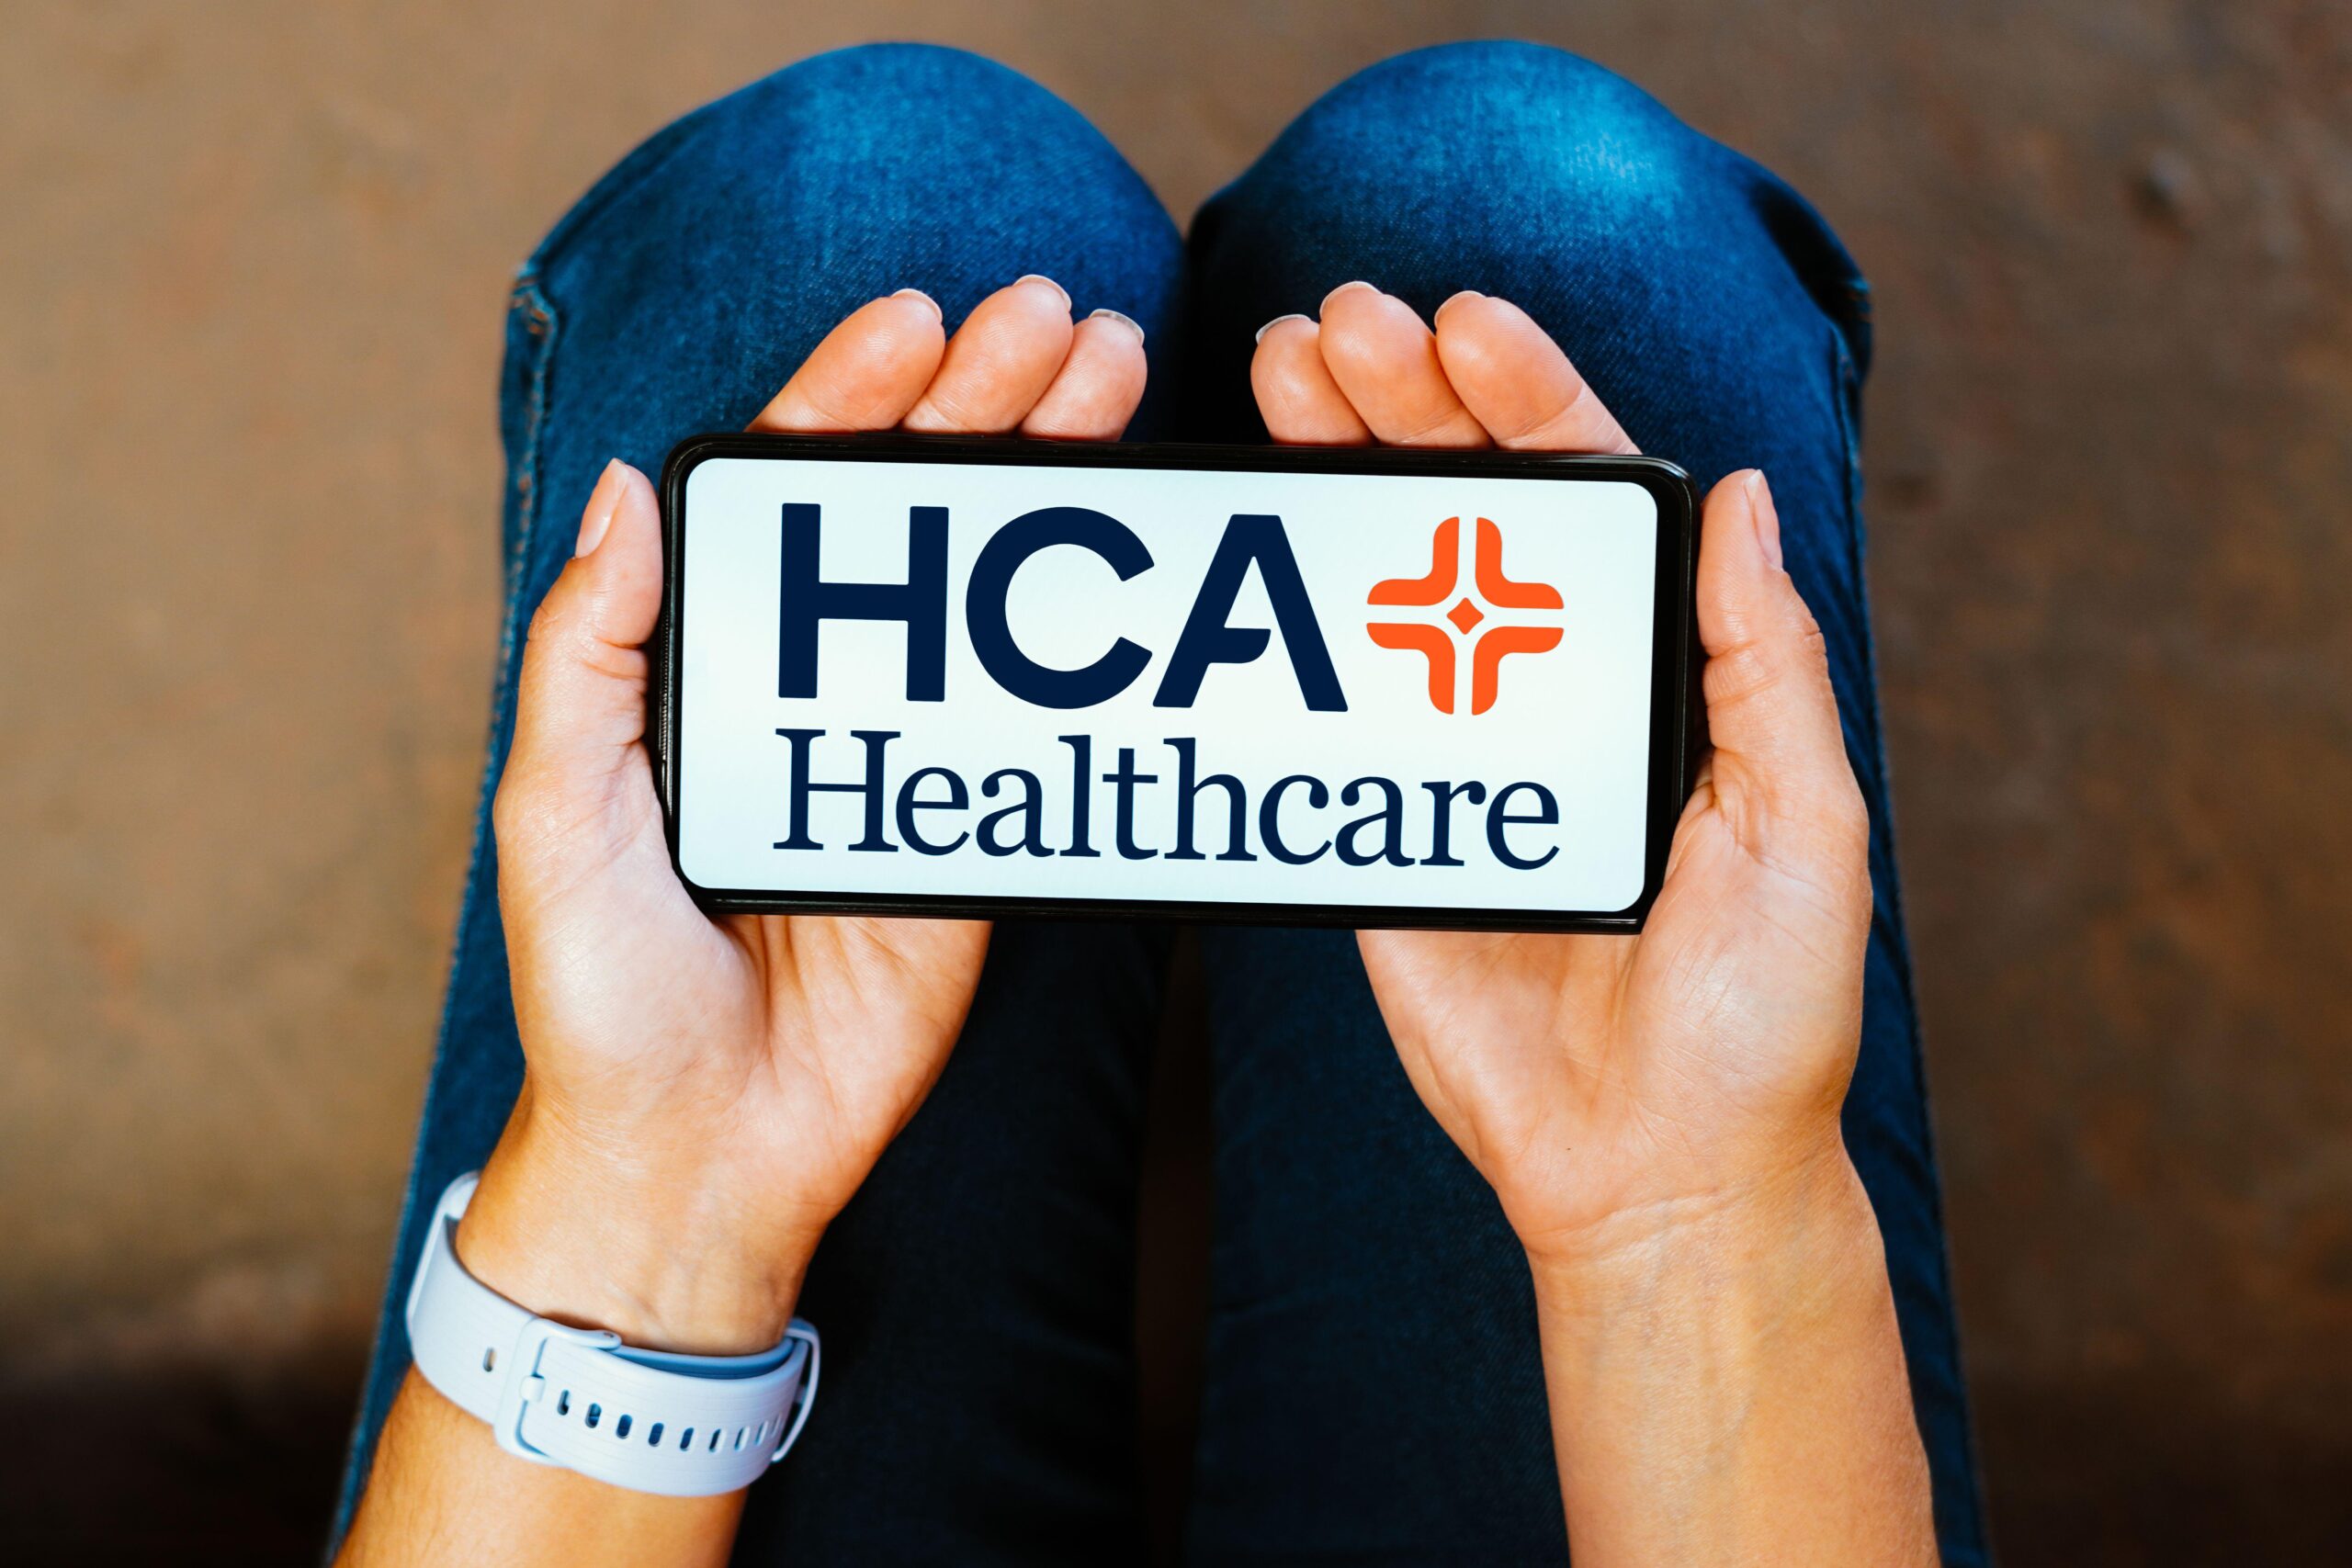 11M HCA Healthcare Patients Impacted by Data Breach – Source: www.darkreading.com